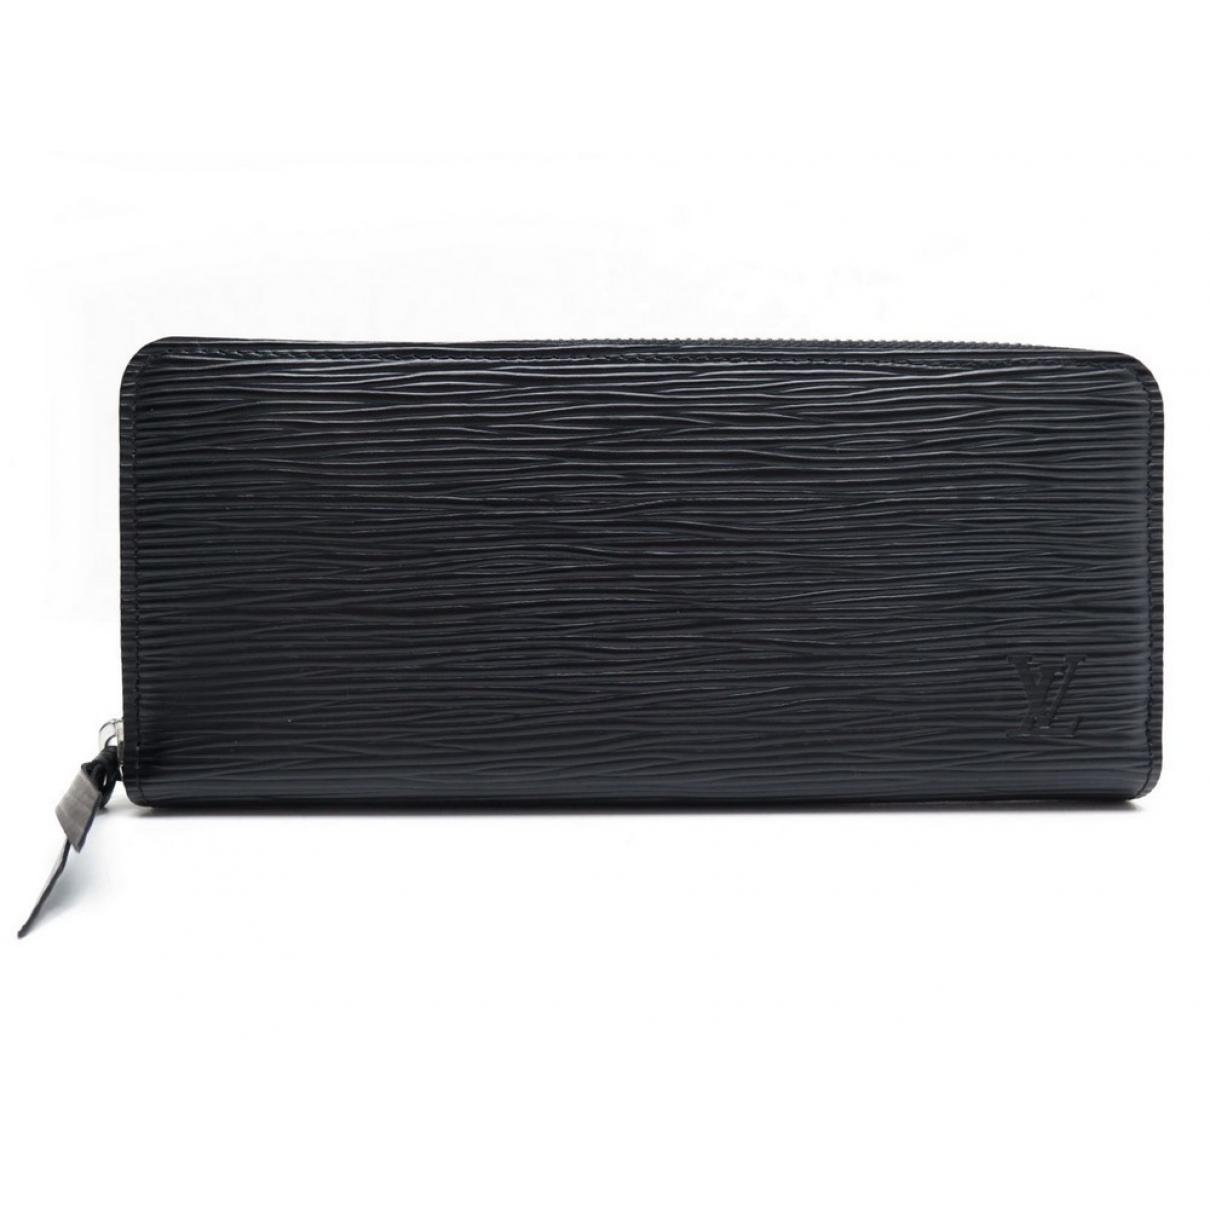 Louis Vuitton Clemence Leather Wallet in Black - Lyst